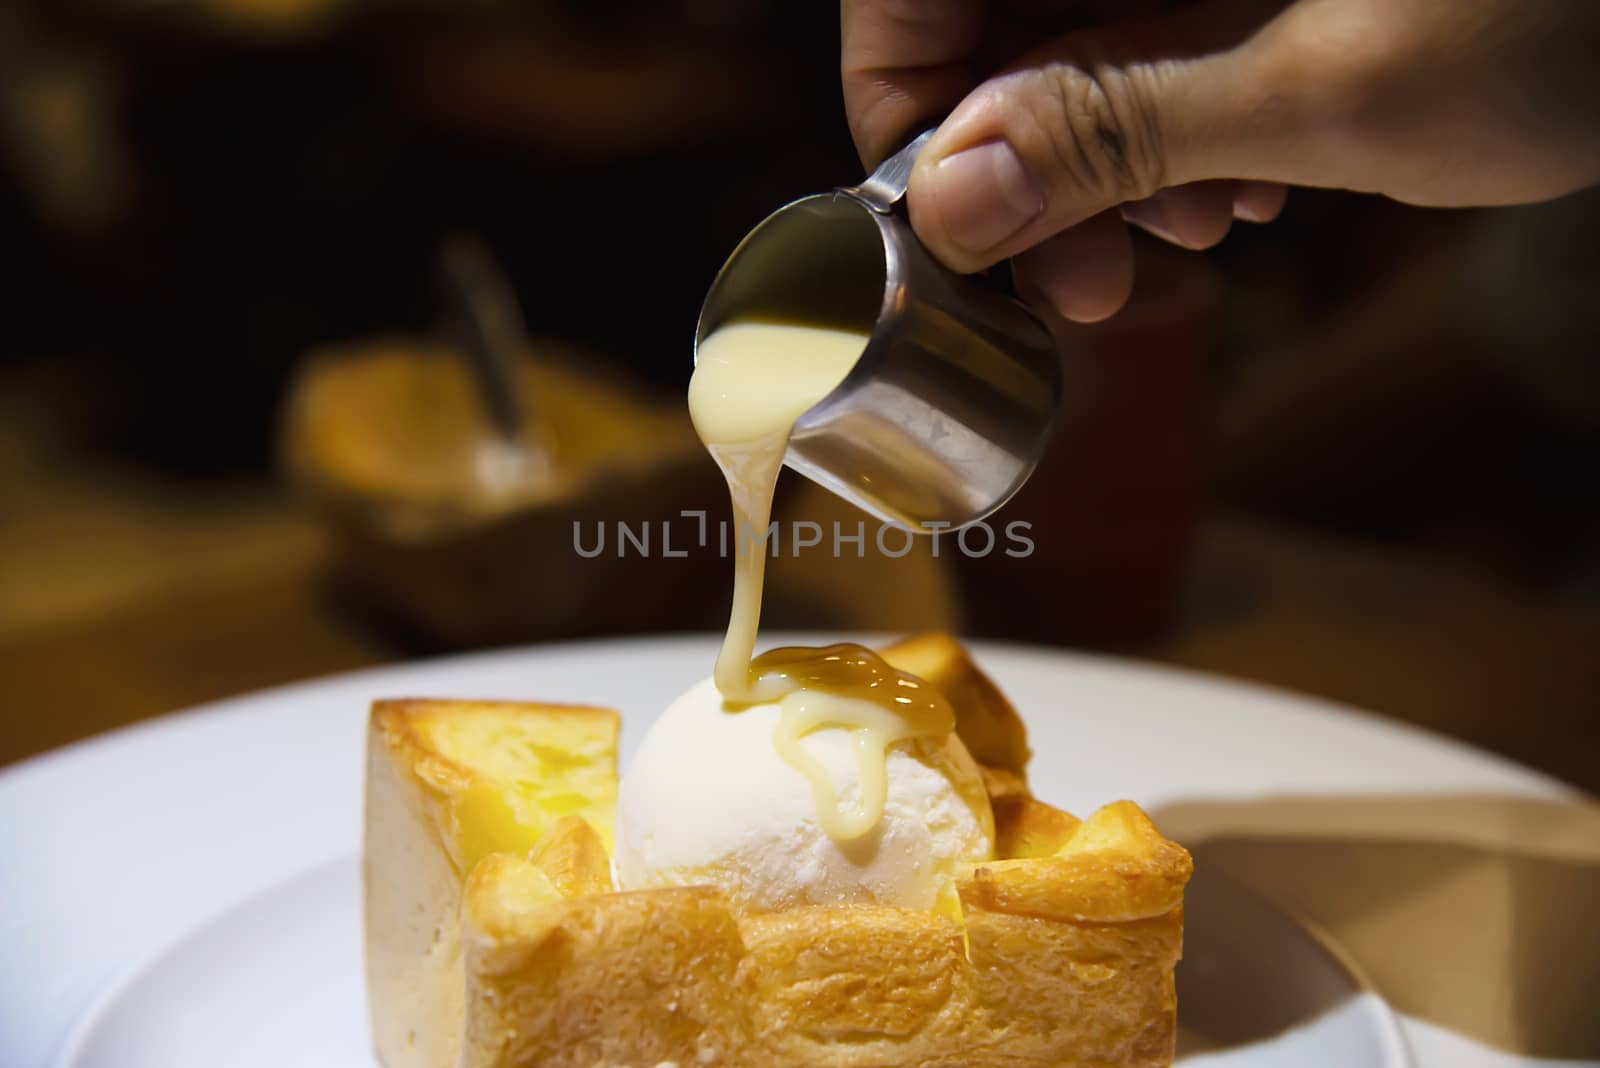 People pouring milk on ice cream bread toast - people with toast dessert sweet eating concept by pairhandmade